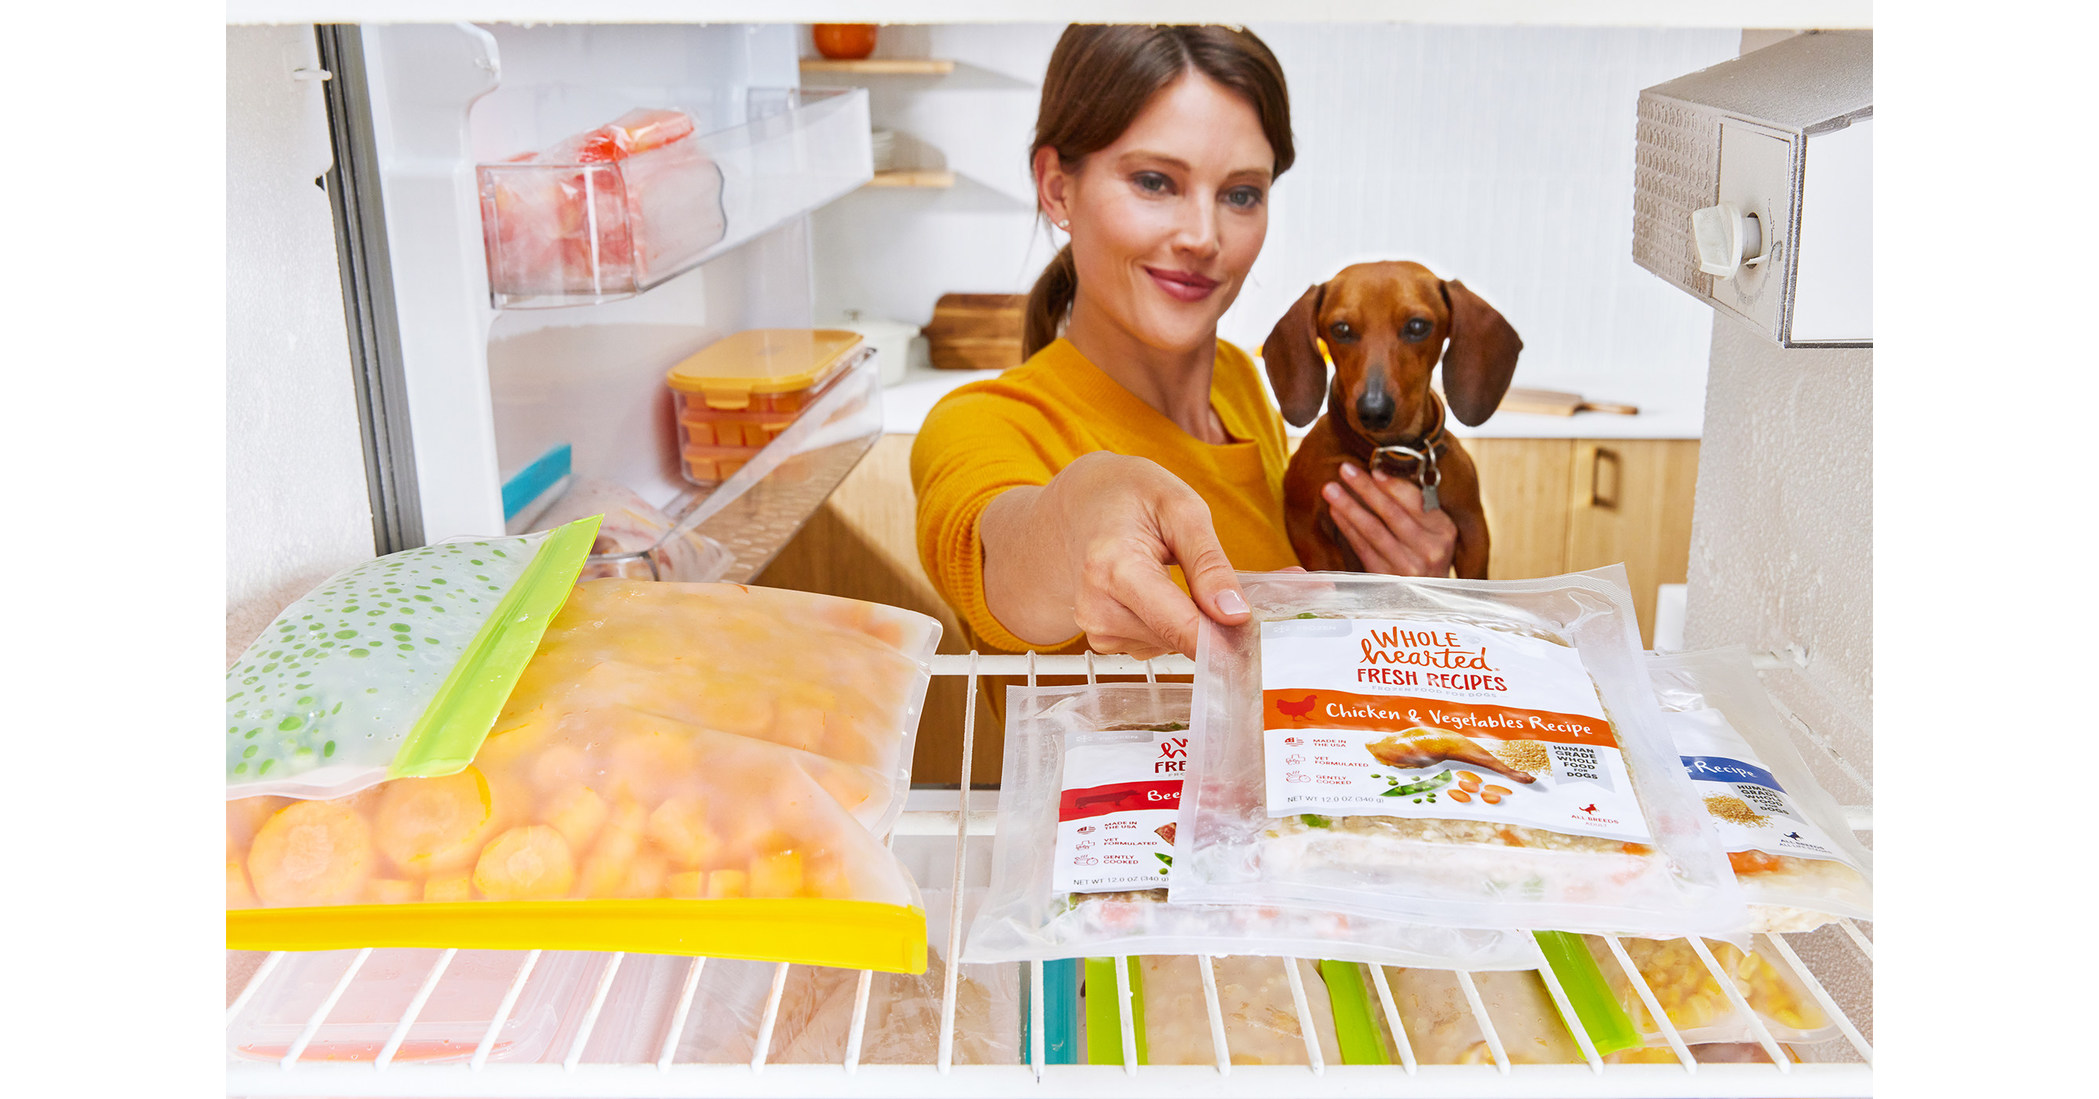 Petco expands same-day delivery of fresh, frozen pet foods